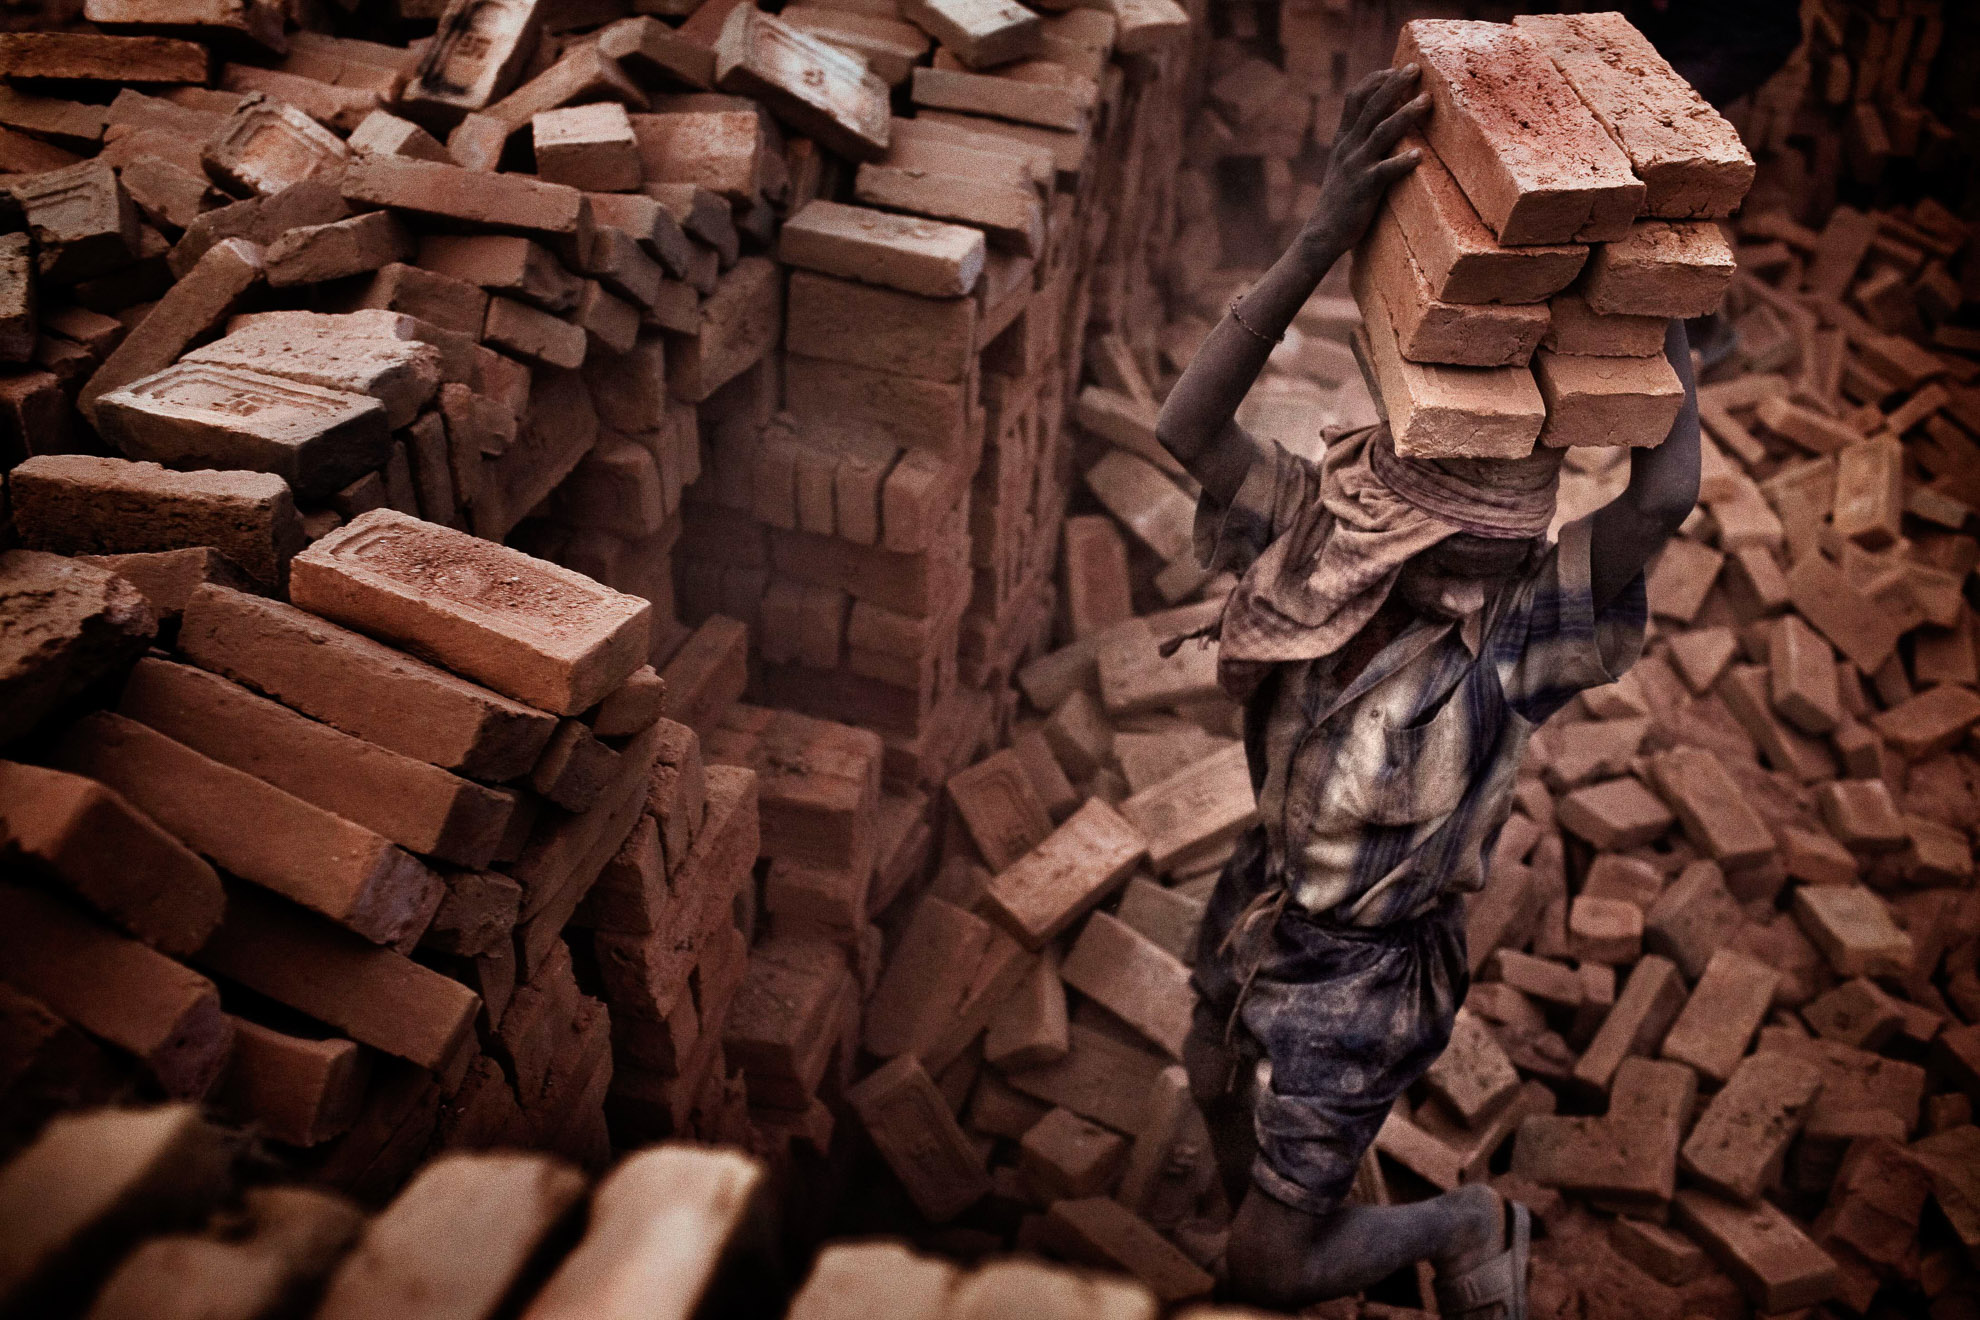 A young worker balances 8 bricks, each weighing 4 kilos, on his head. At every visit the brick pile he is exposed to significant quantities of hazardous dust.